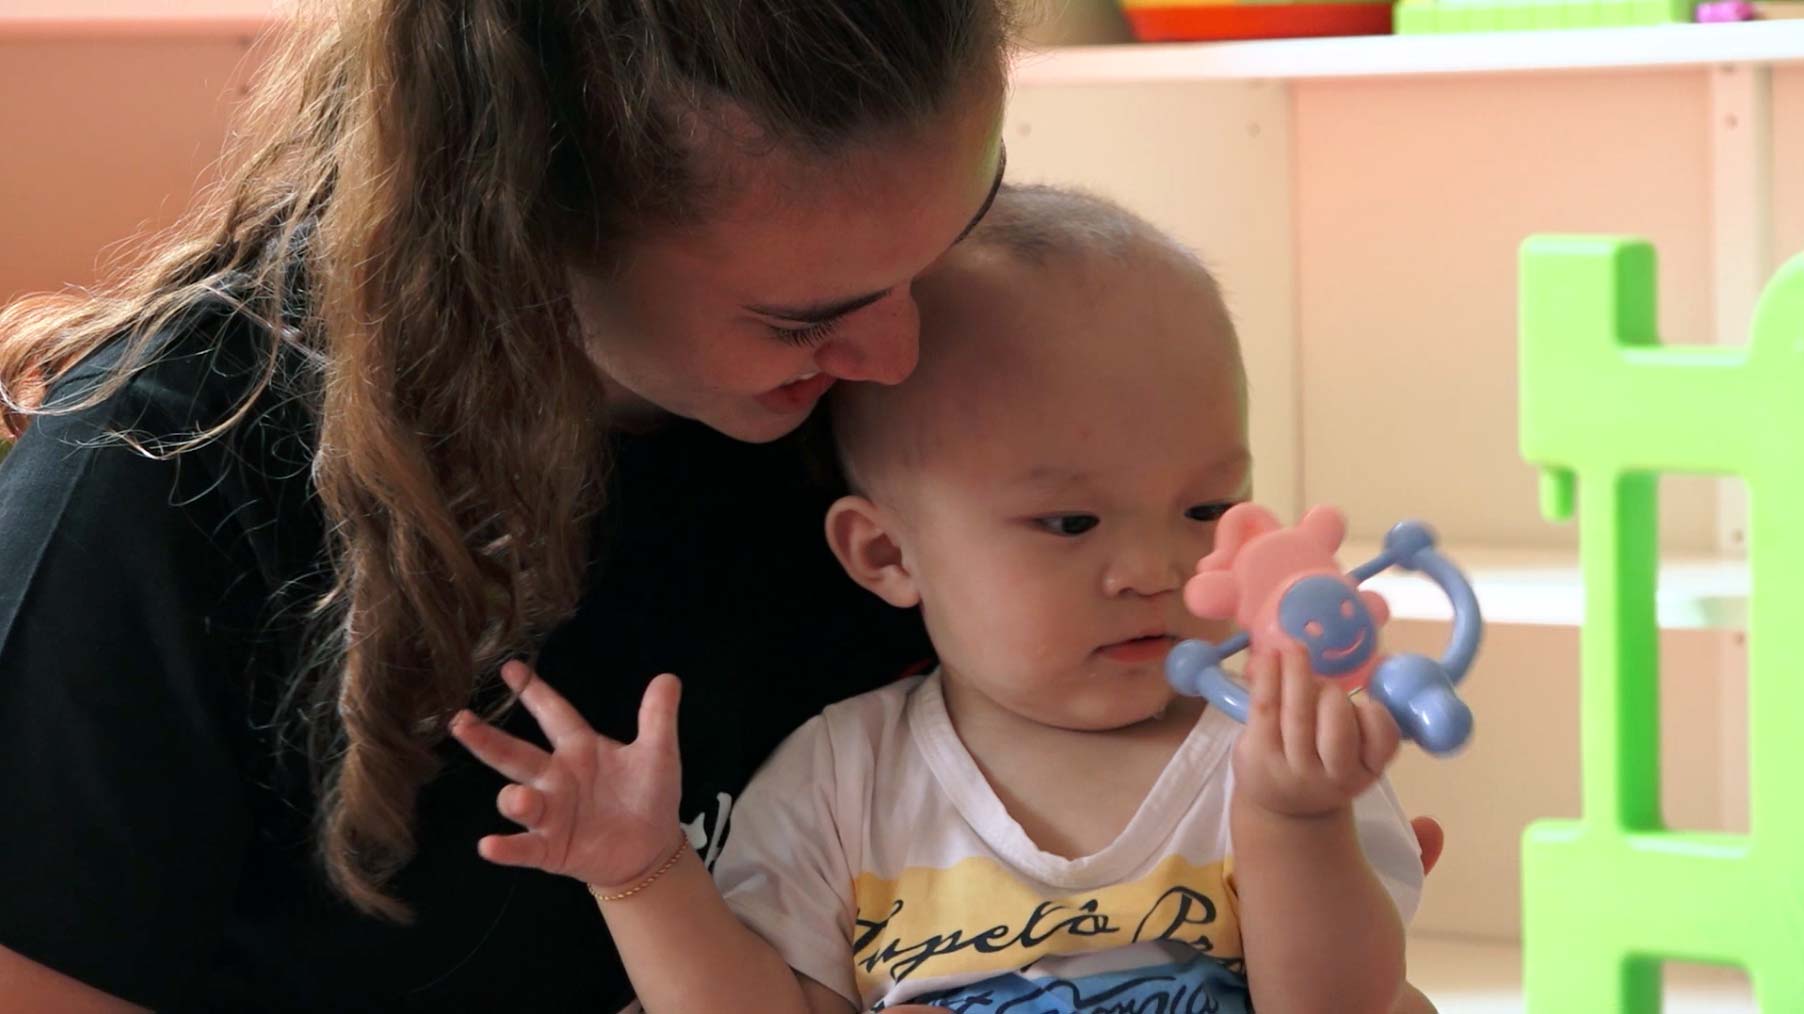 An estimated 600,000 children in China are abandoned—98 percent of whom have disabilities. This Notre Dame Hesburgh-Yusko Scholar aims to make a difference.